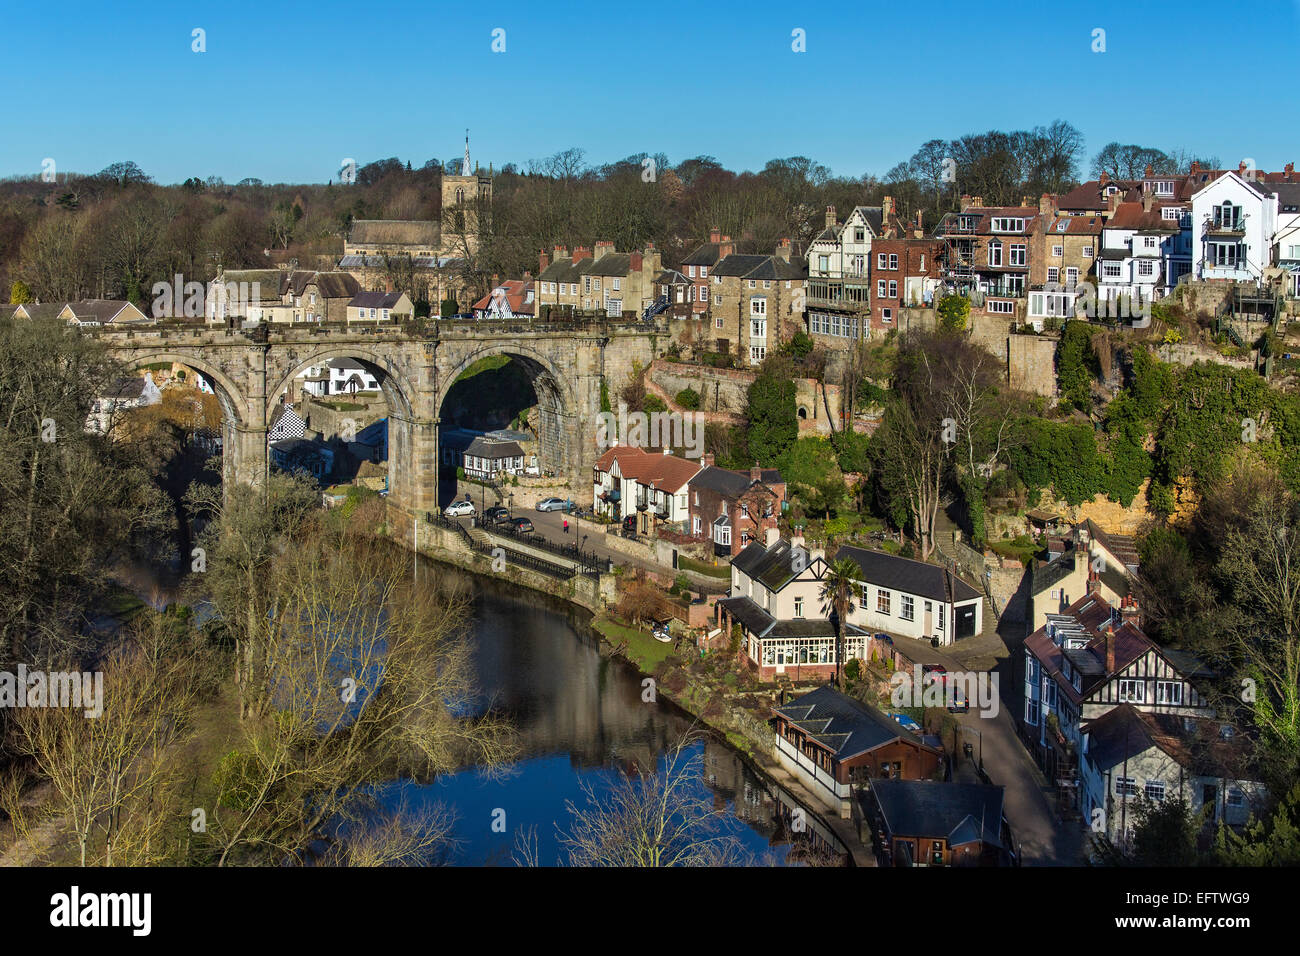 Knearsborough - an historic market town, spa town and civil parish in the Borough of Harrogate in North Yorkshire, England. Stock Photo